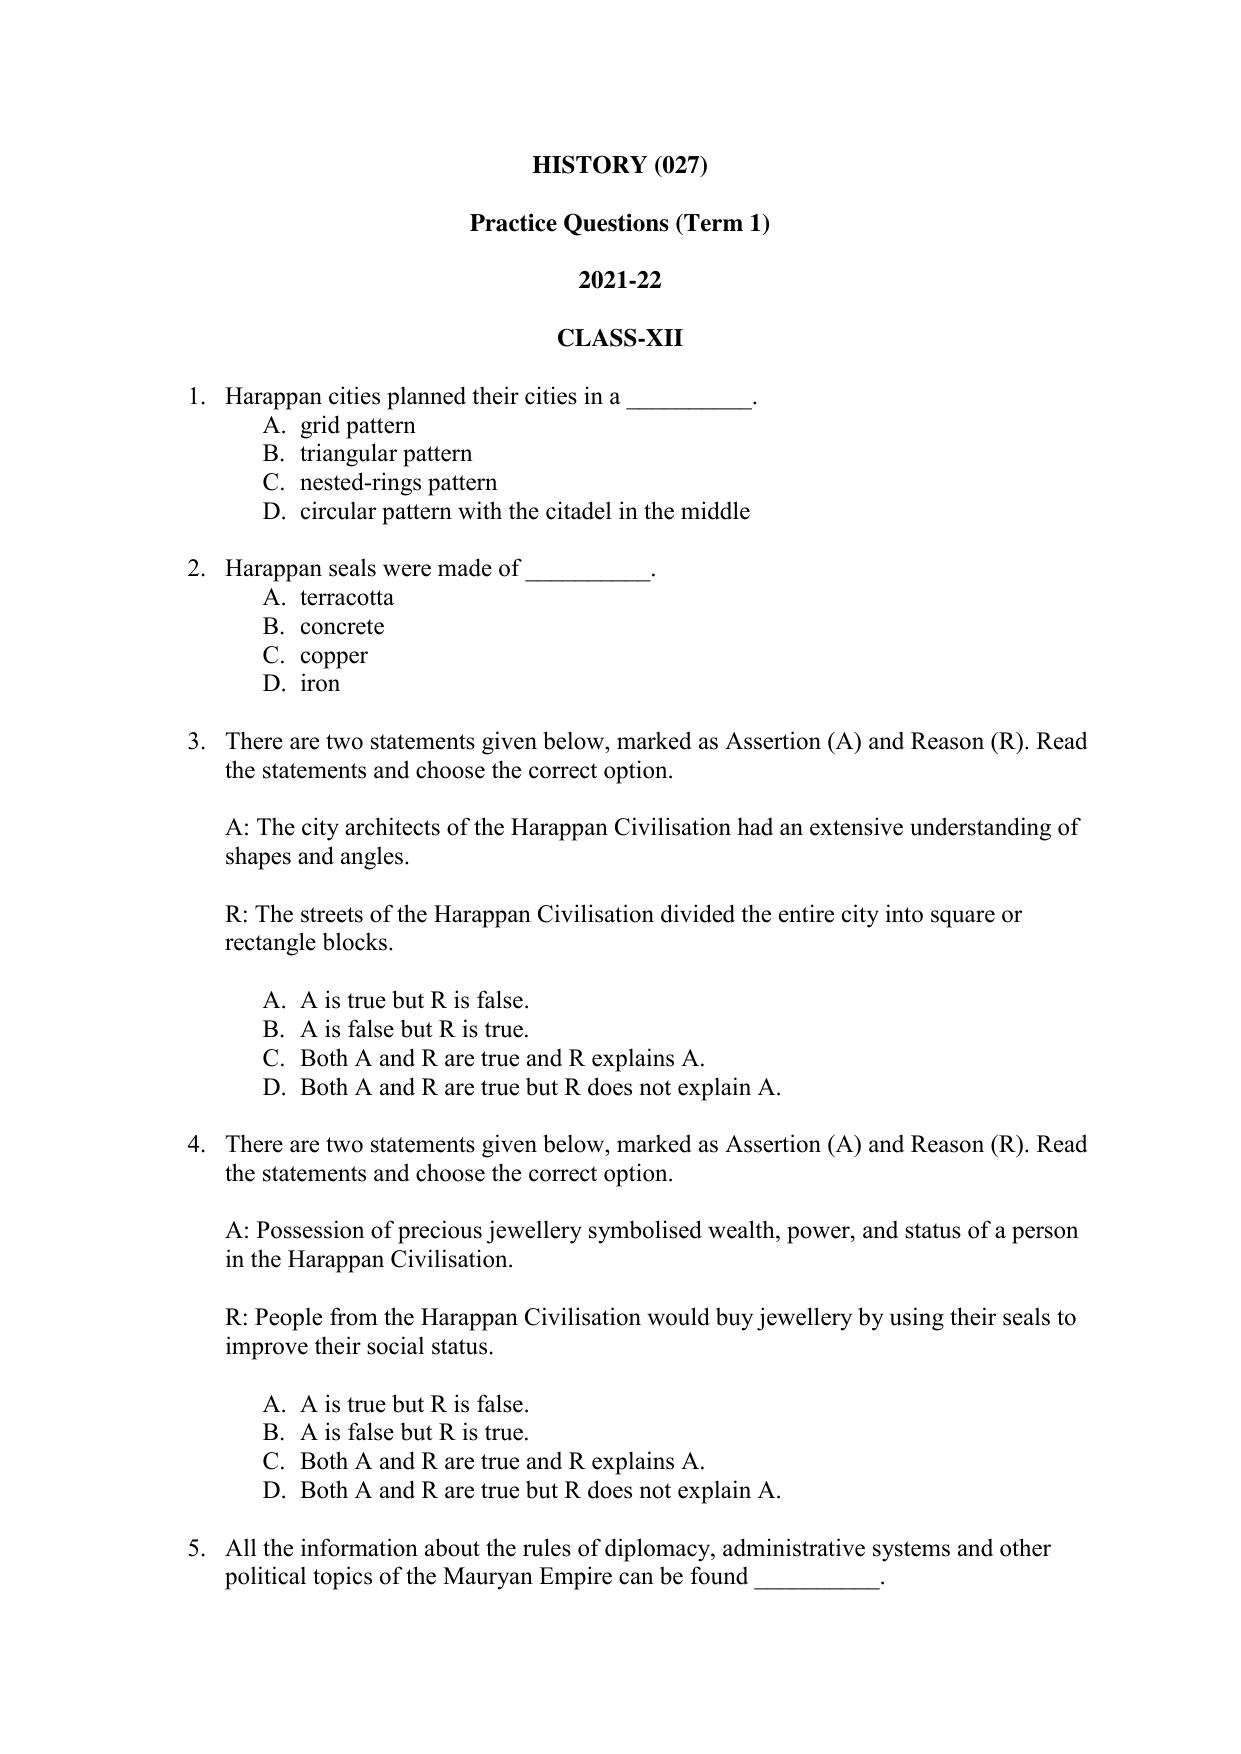 CBSE Class 12 History Term 1 Practice Questions 2021-22 - Page 1